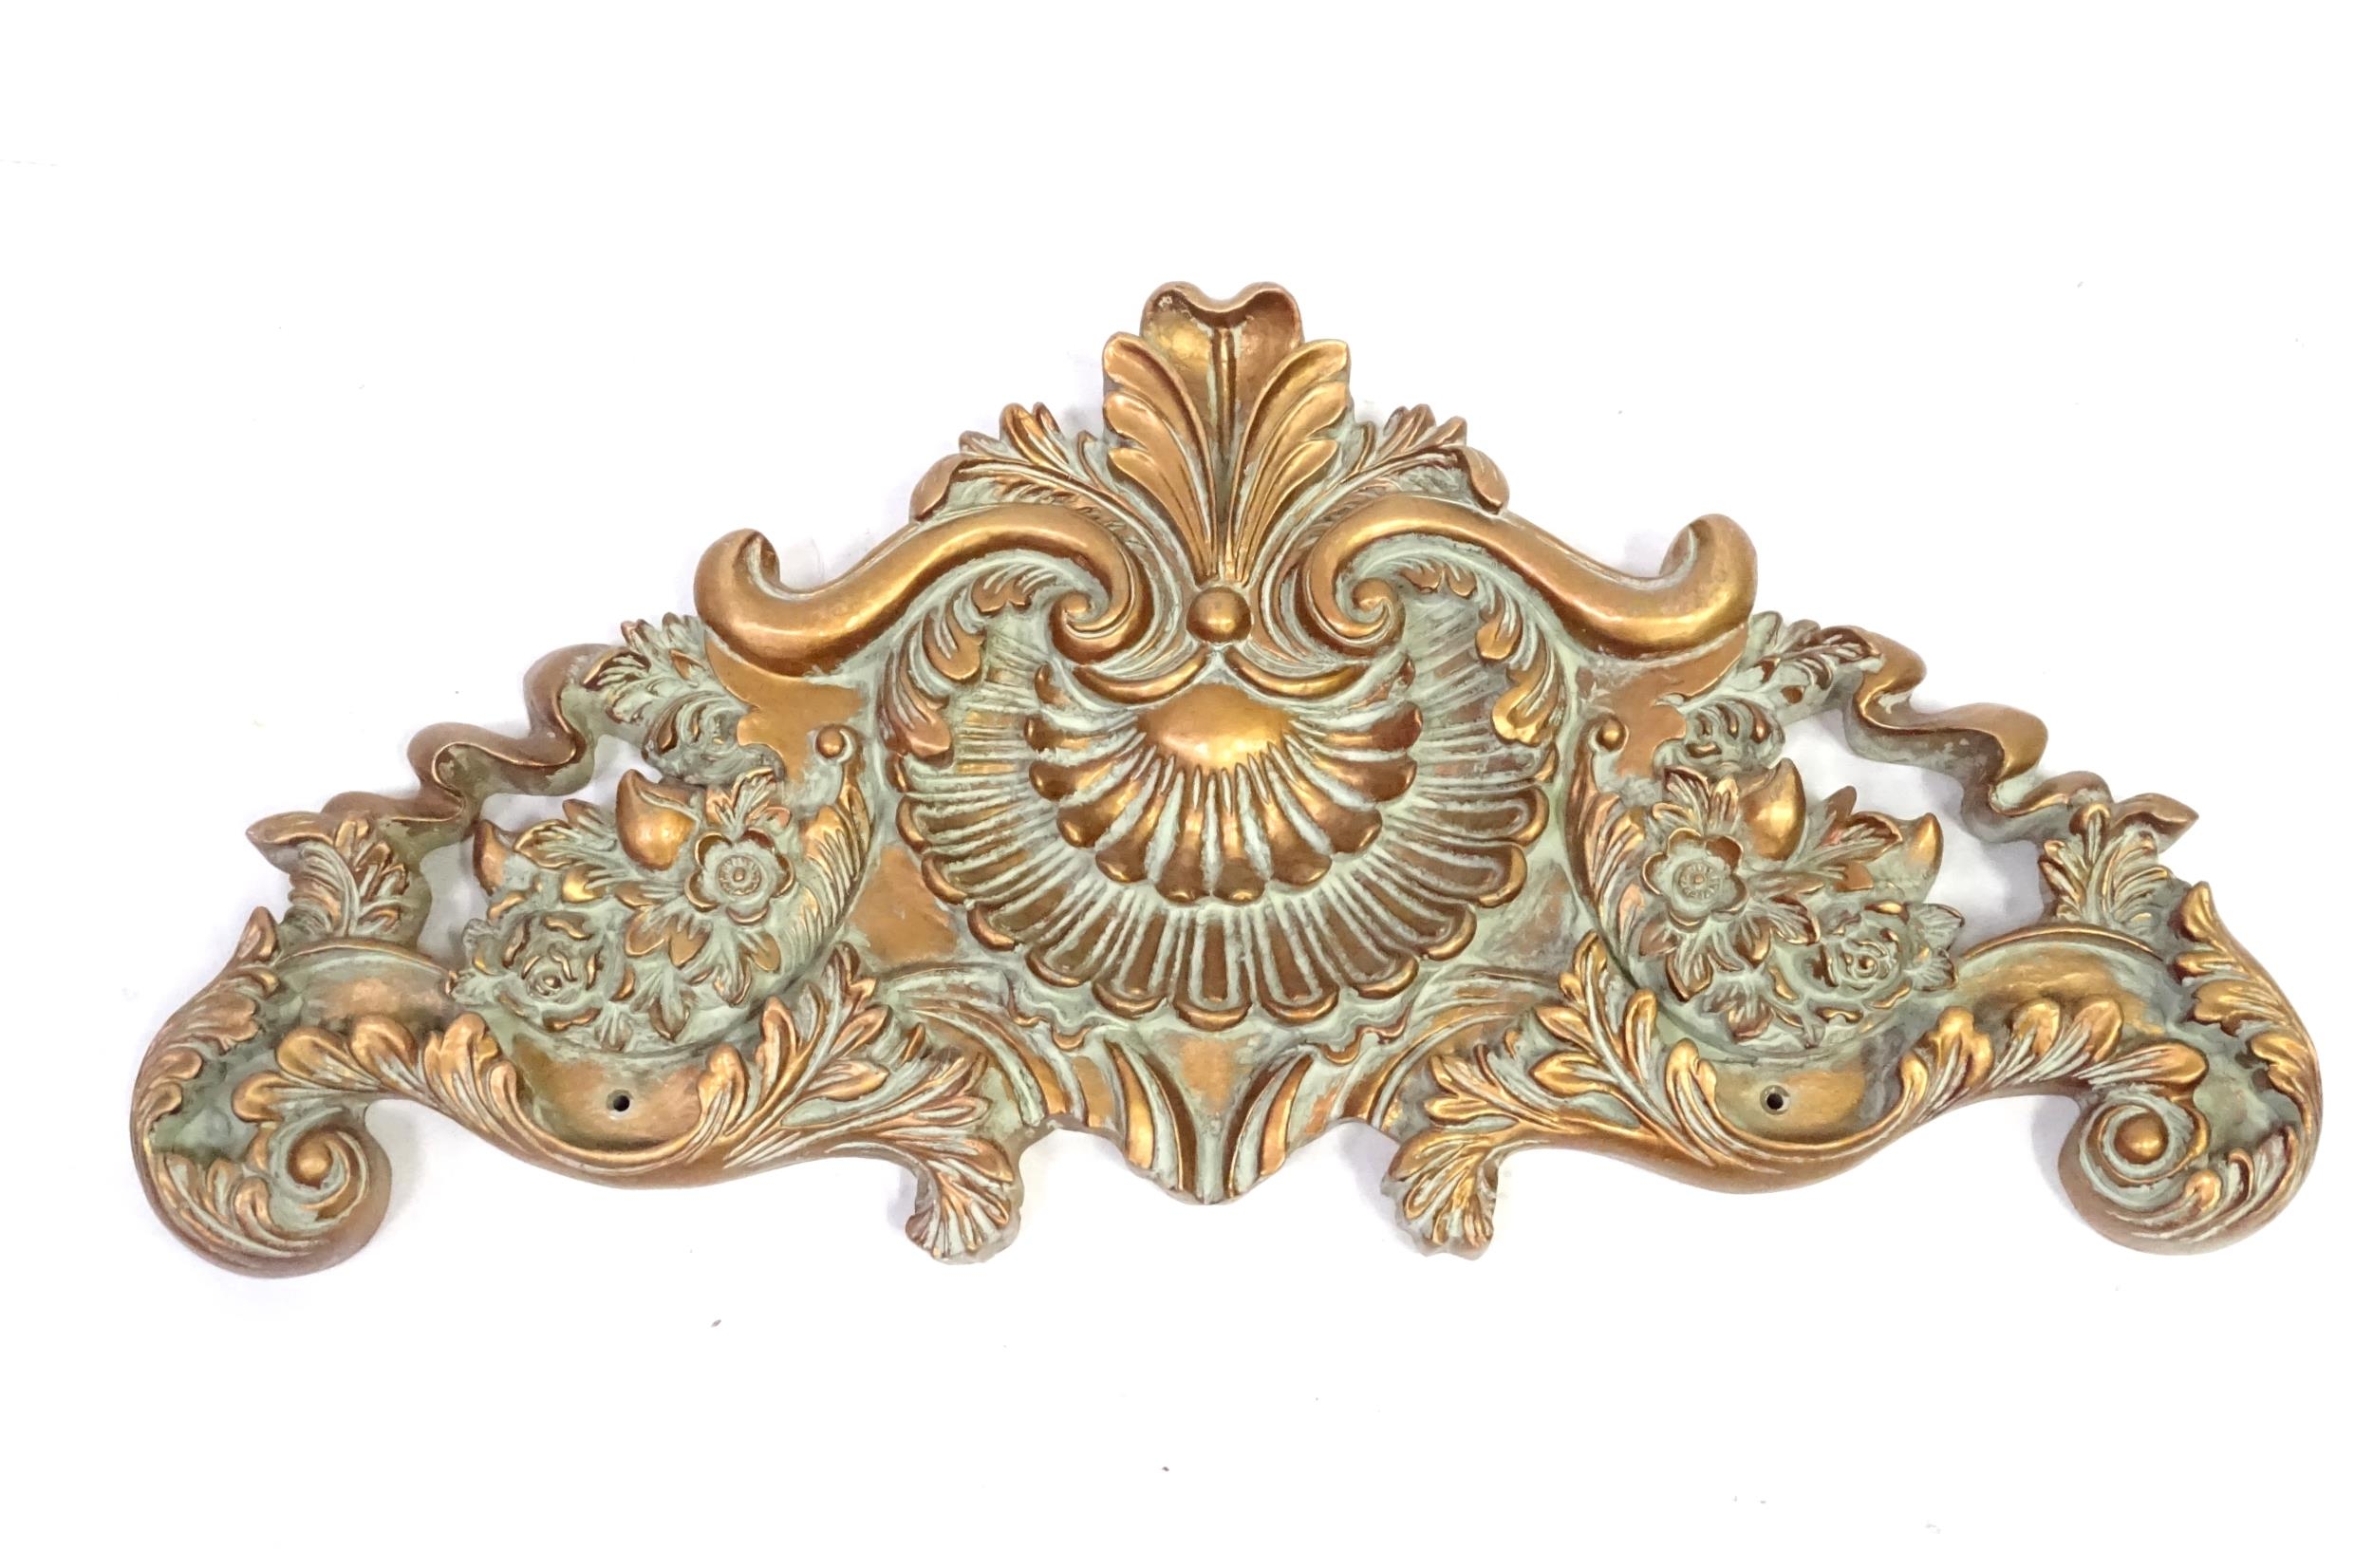 A gilt architectural / decorative moulding, with shell and floral motifs , 31" wide x 15" tall